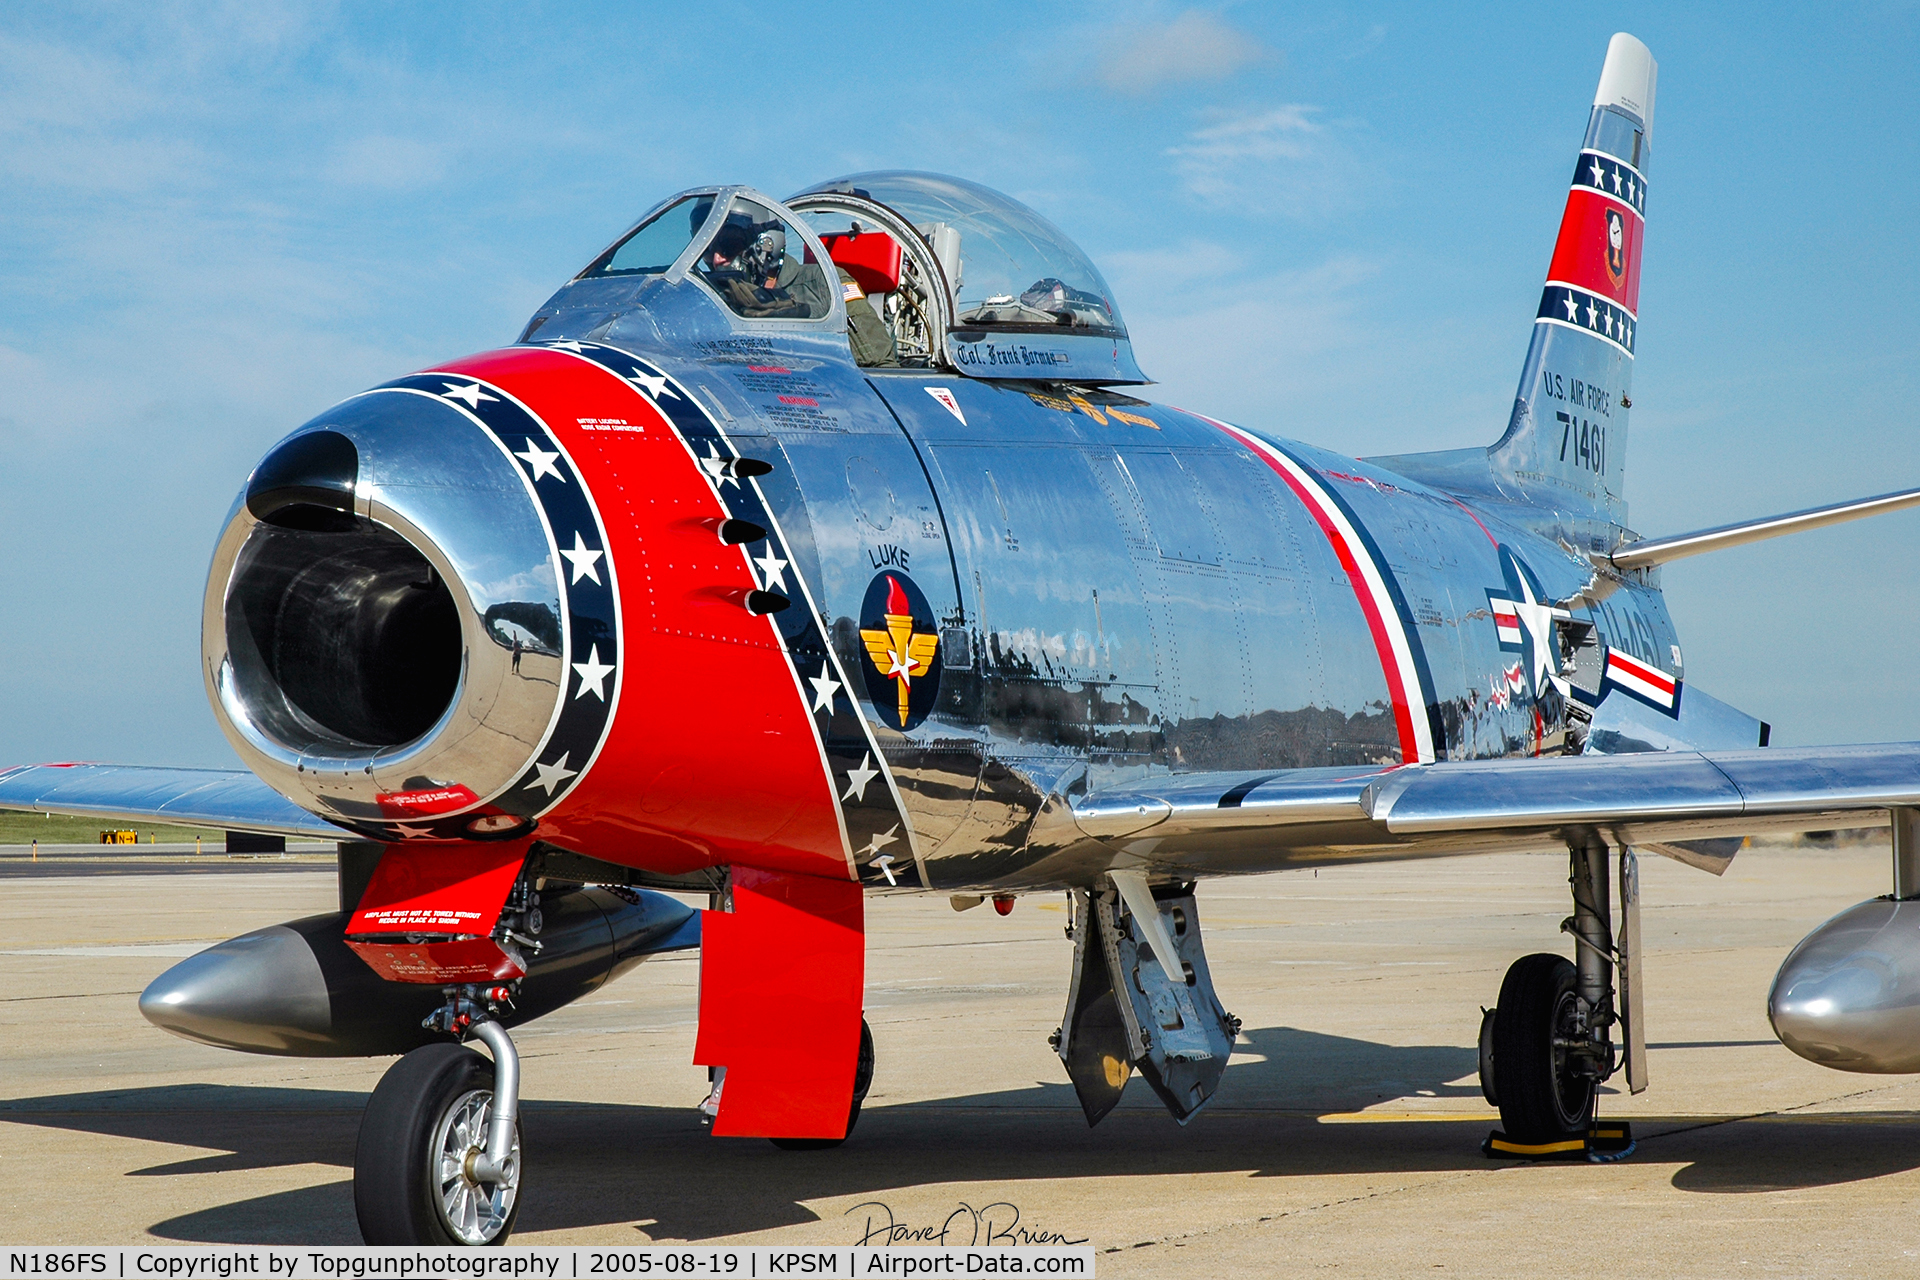 N186FS, 1956 Canadair CL-13B Sabre 6 C/N 1461, Ed Shipley arriving with the F-86